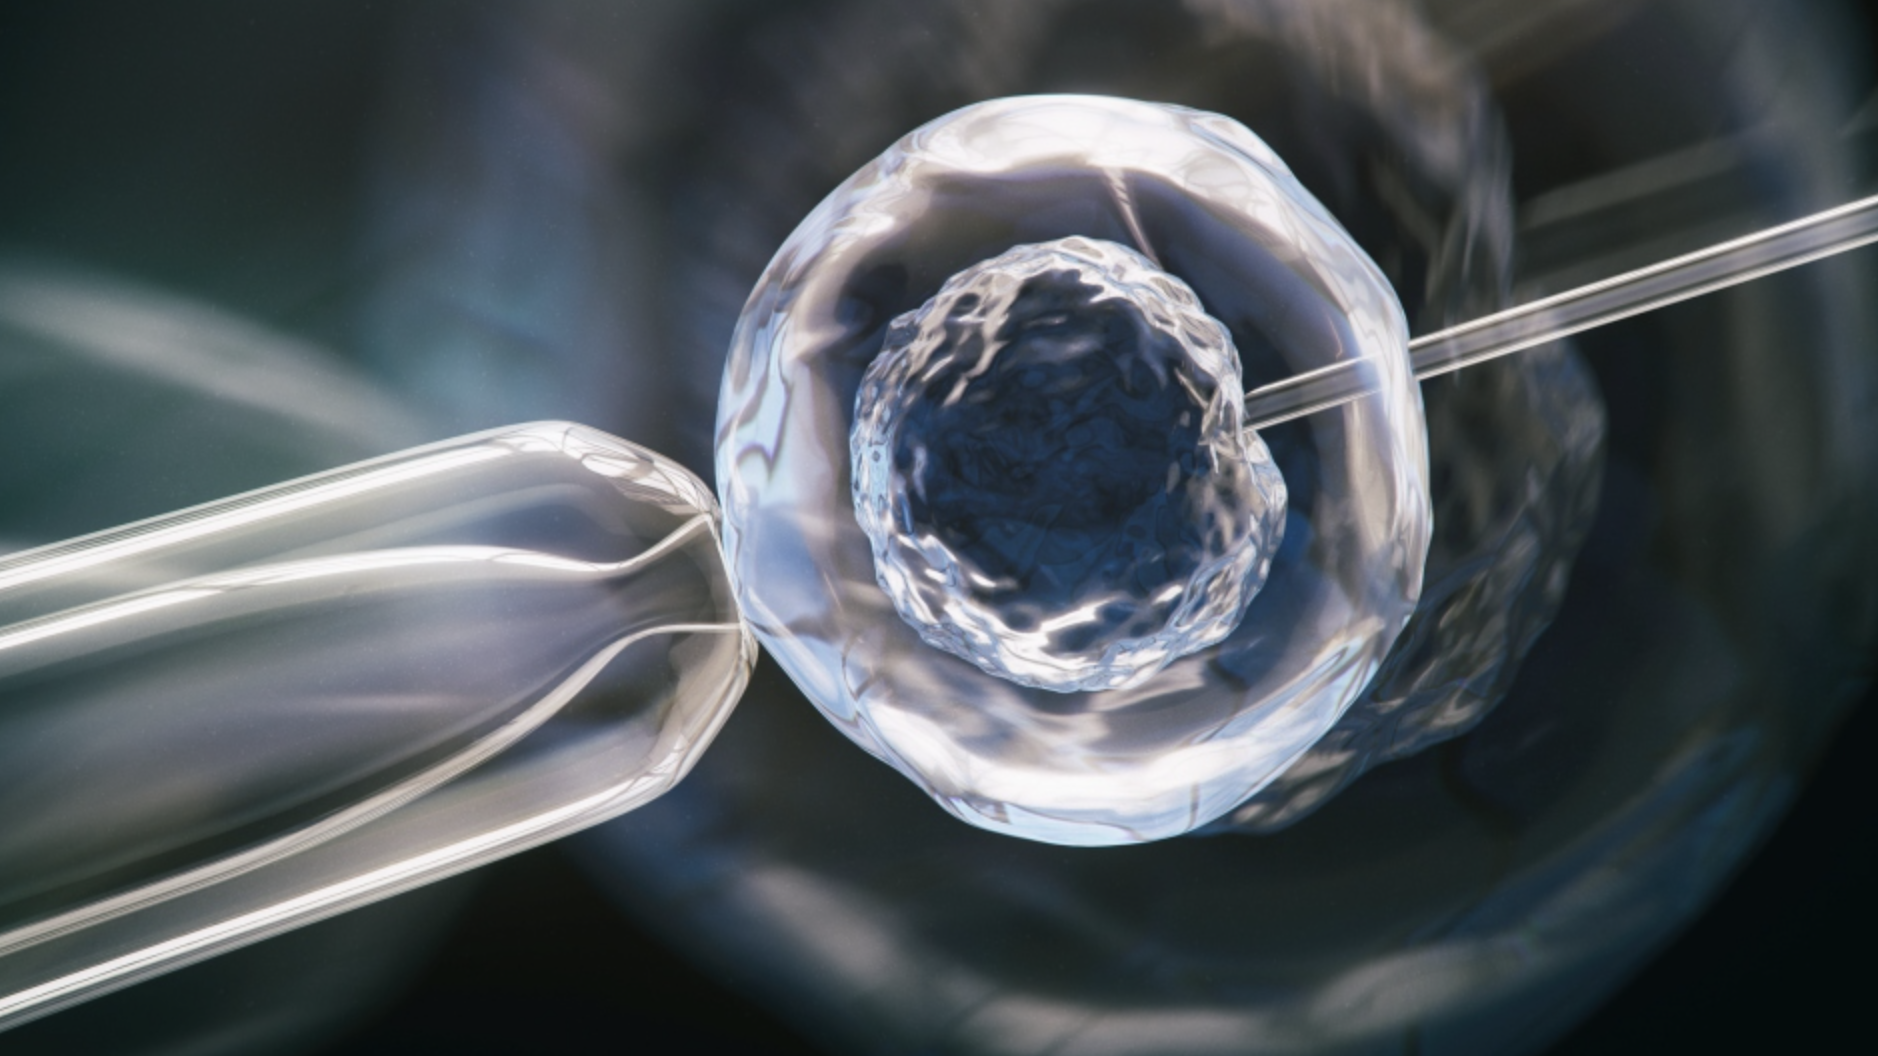 Breakthrough: Scientists Develop Synthetic Human Embryos Without Sperm or Eggs